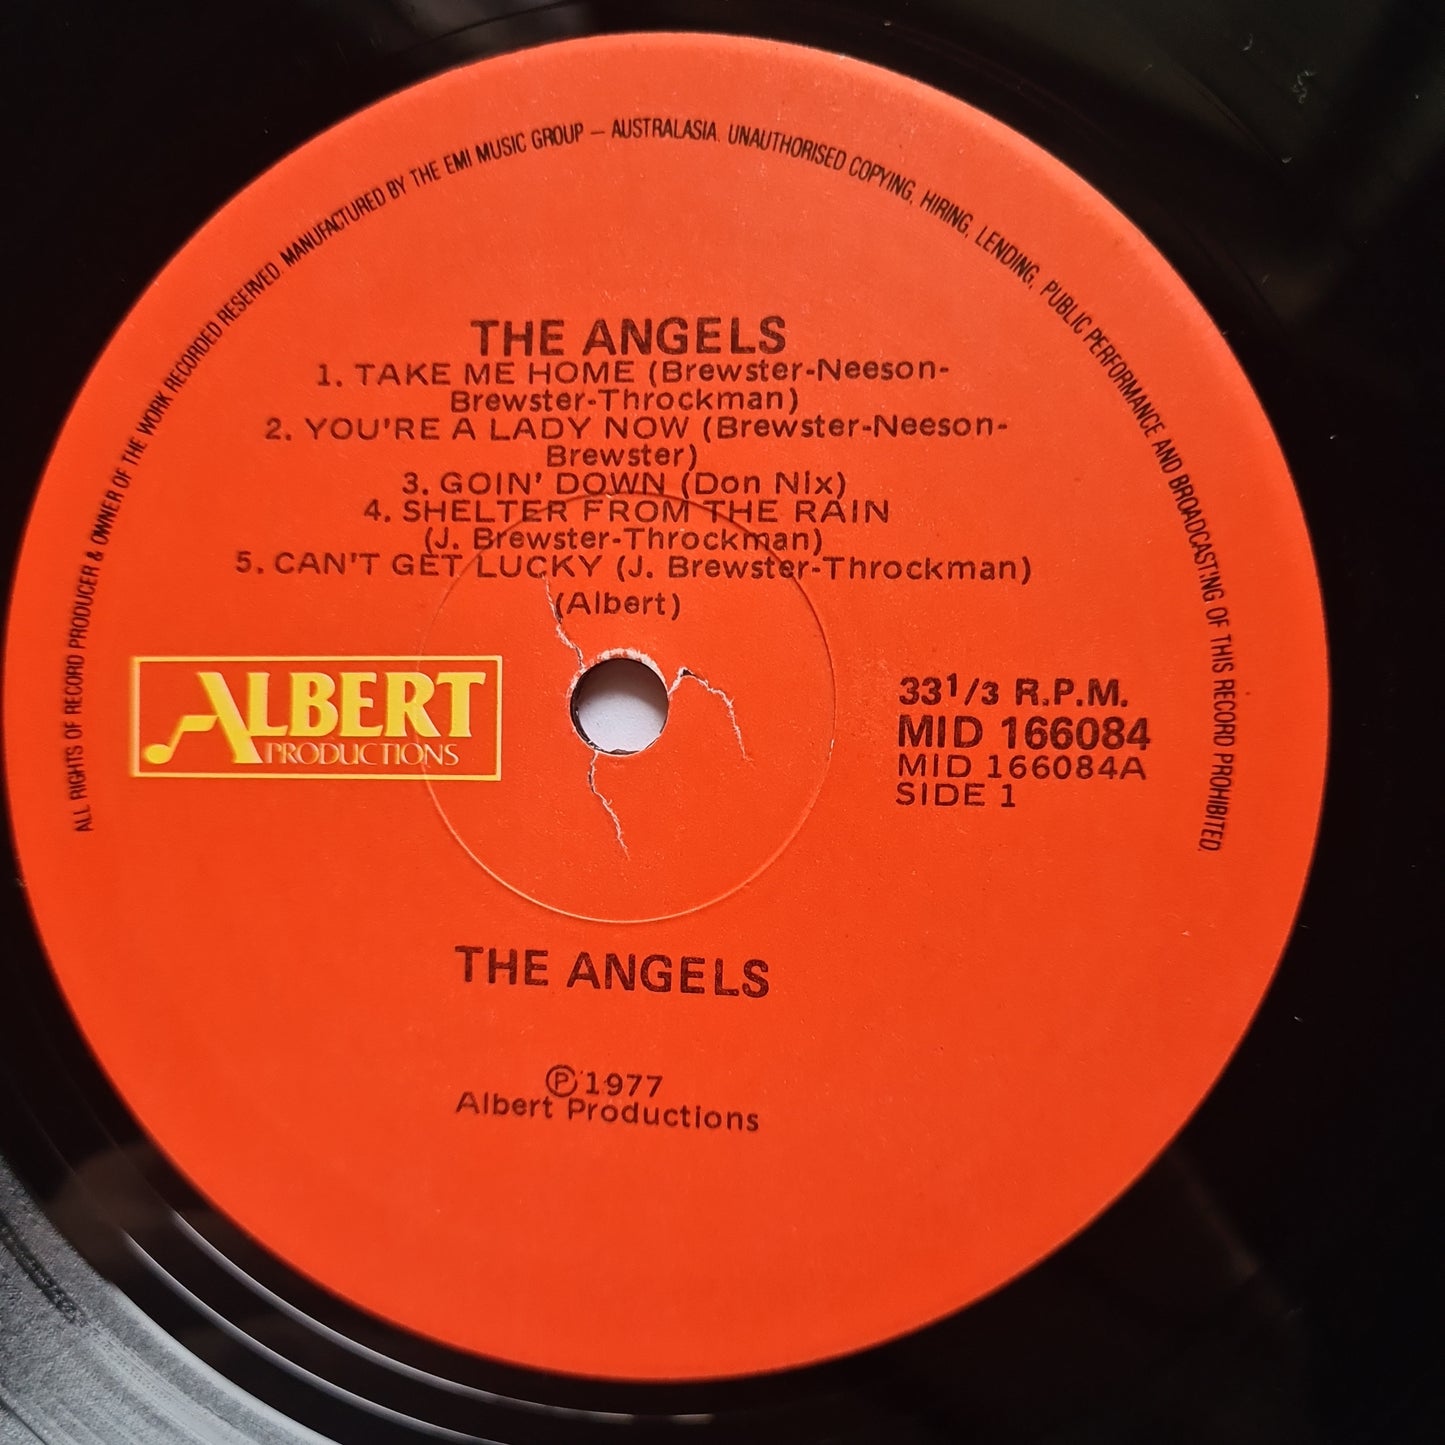 The Angels – The Angels - 1977 (1987 Red Label Pressing- Near Mint record looks Unplayed) - Vinyl Record